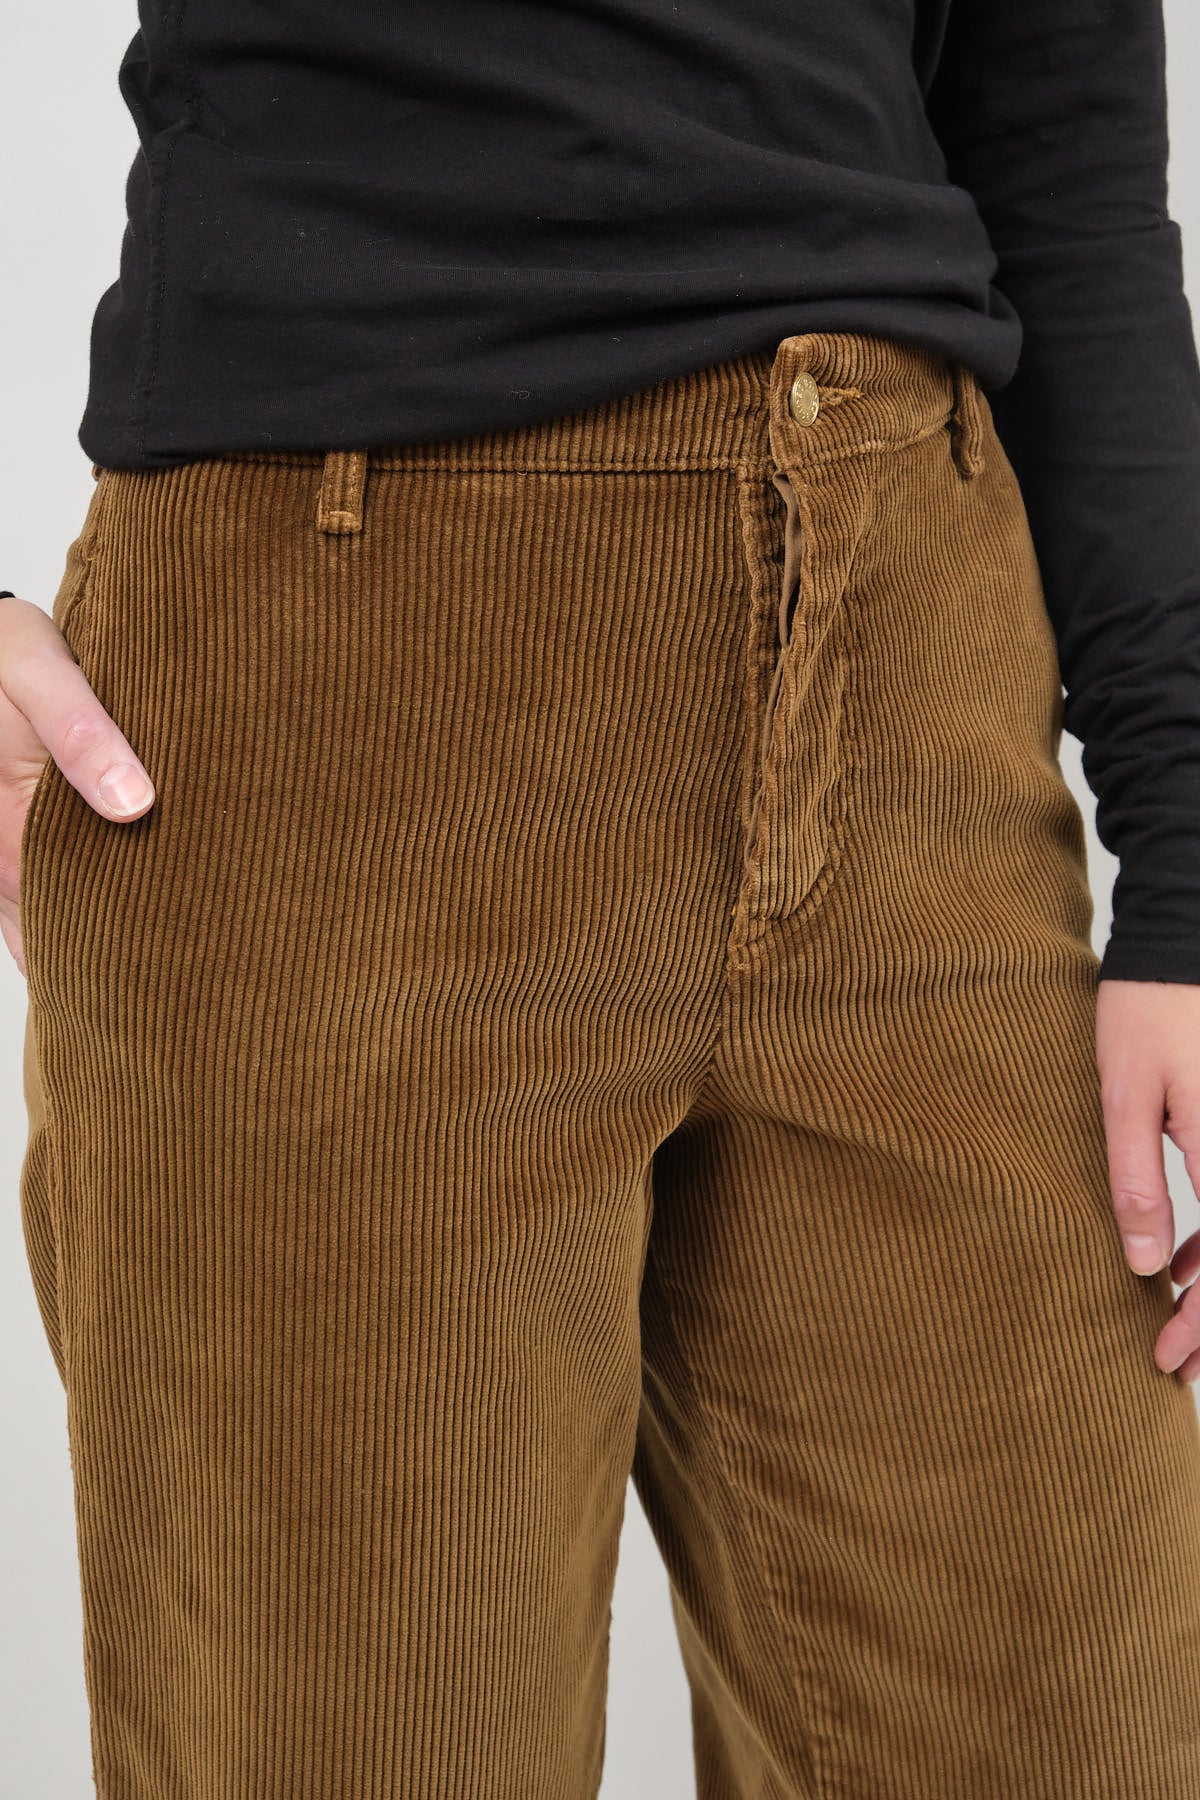 Rise on Chino in Camel Corduroy